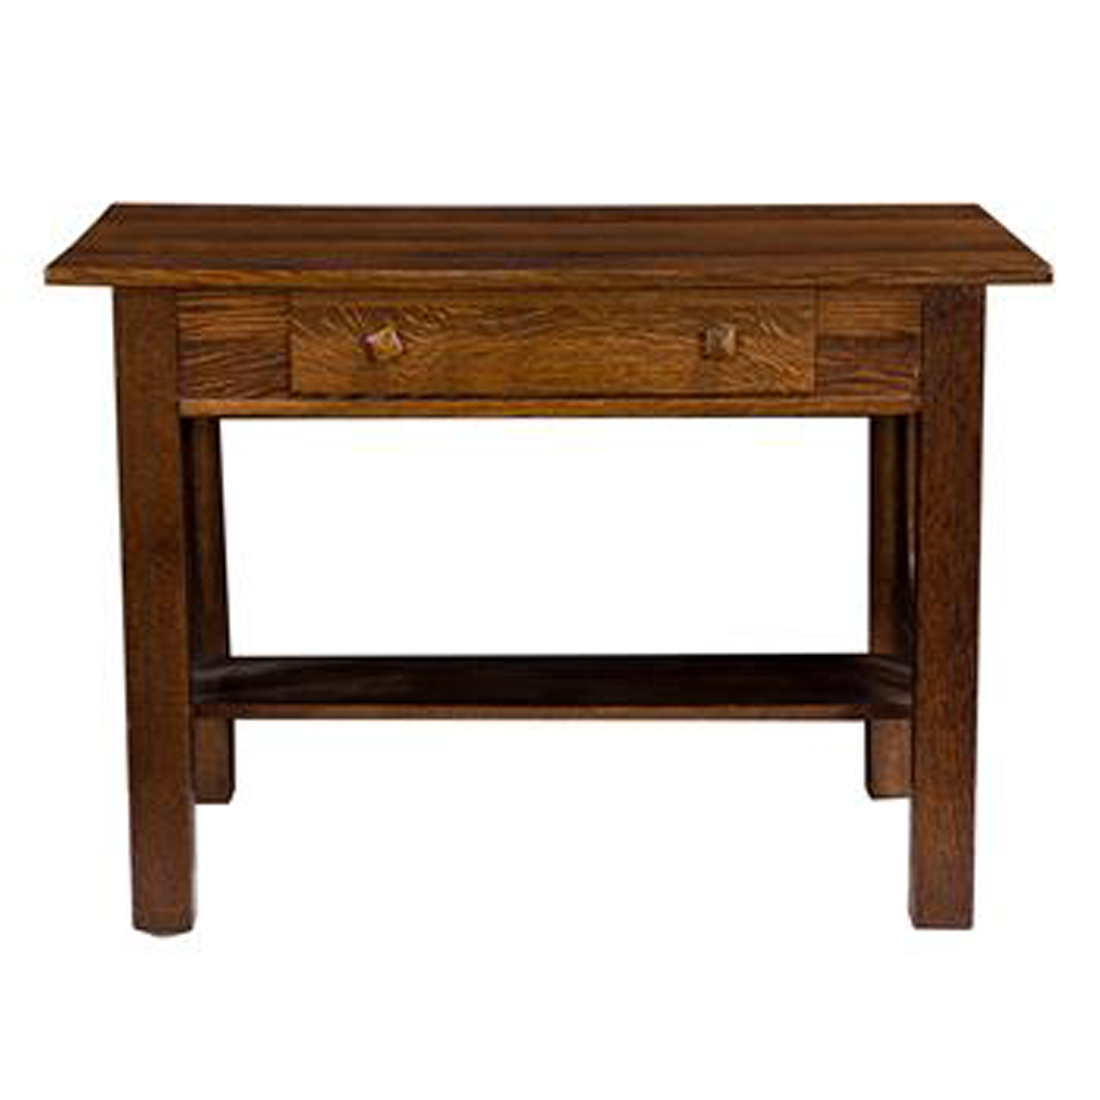 AN ARTS AND CRAFTS DESK LIKELY 3b4266